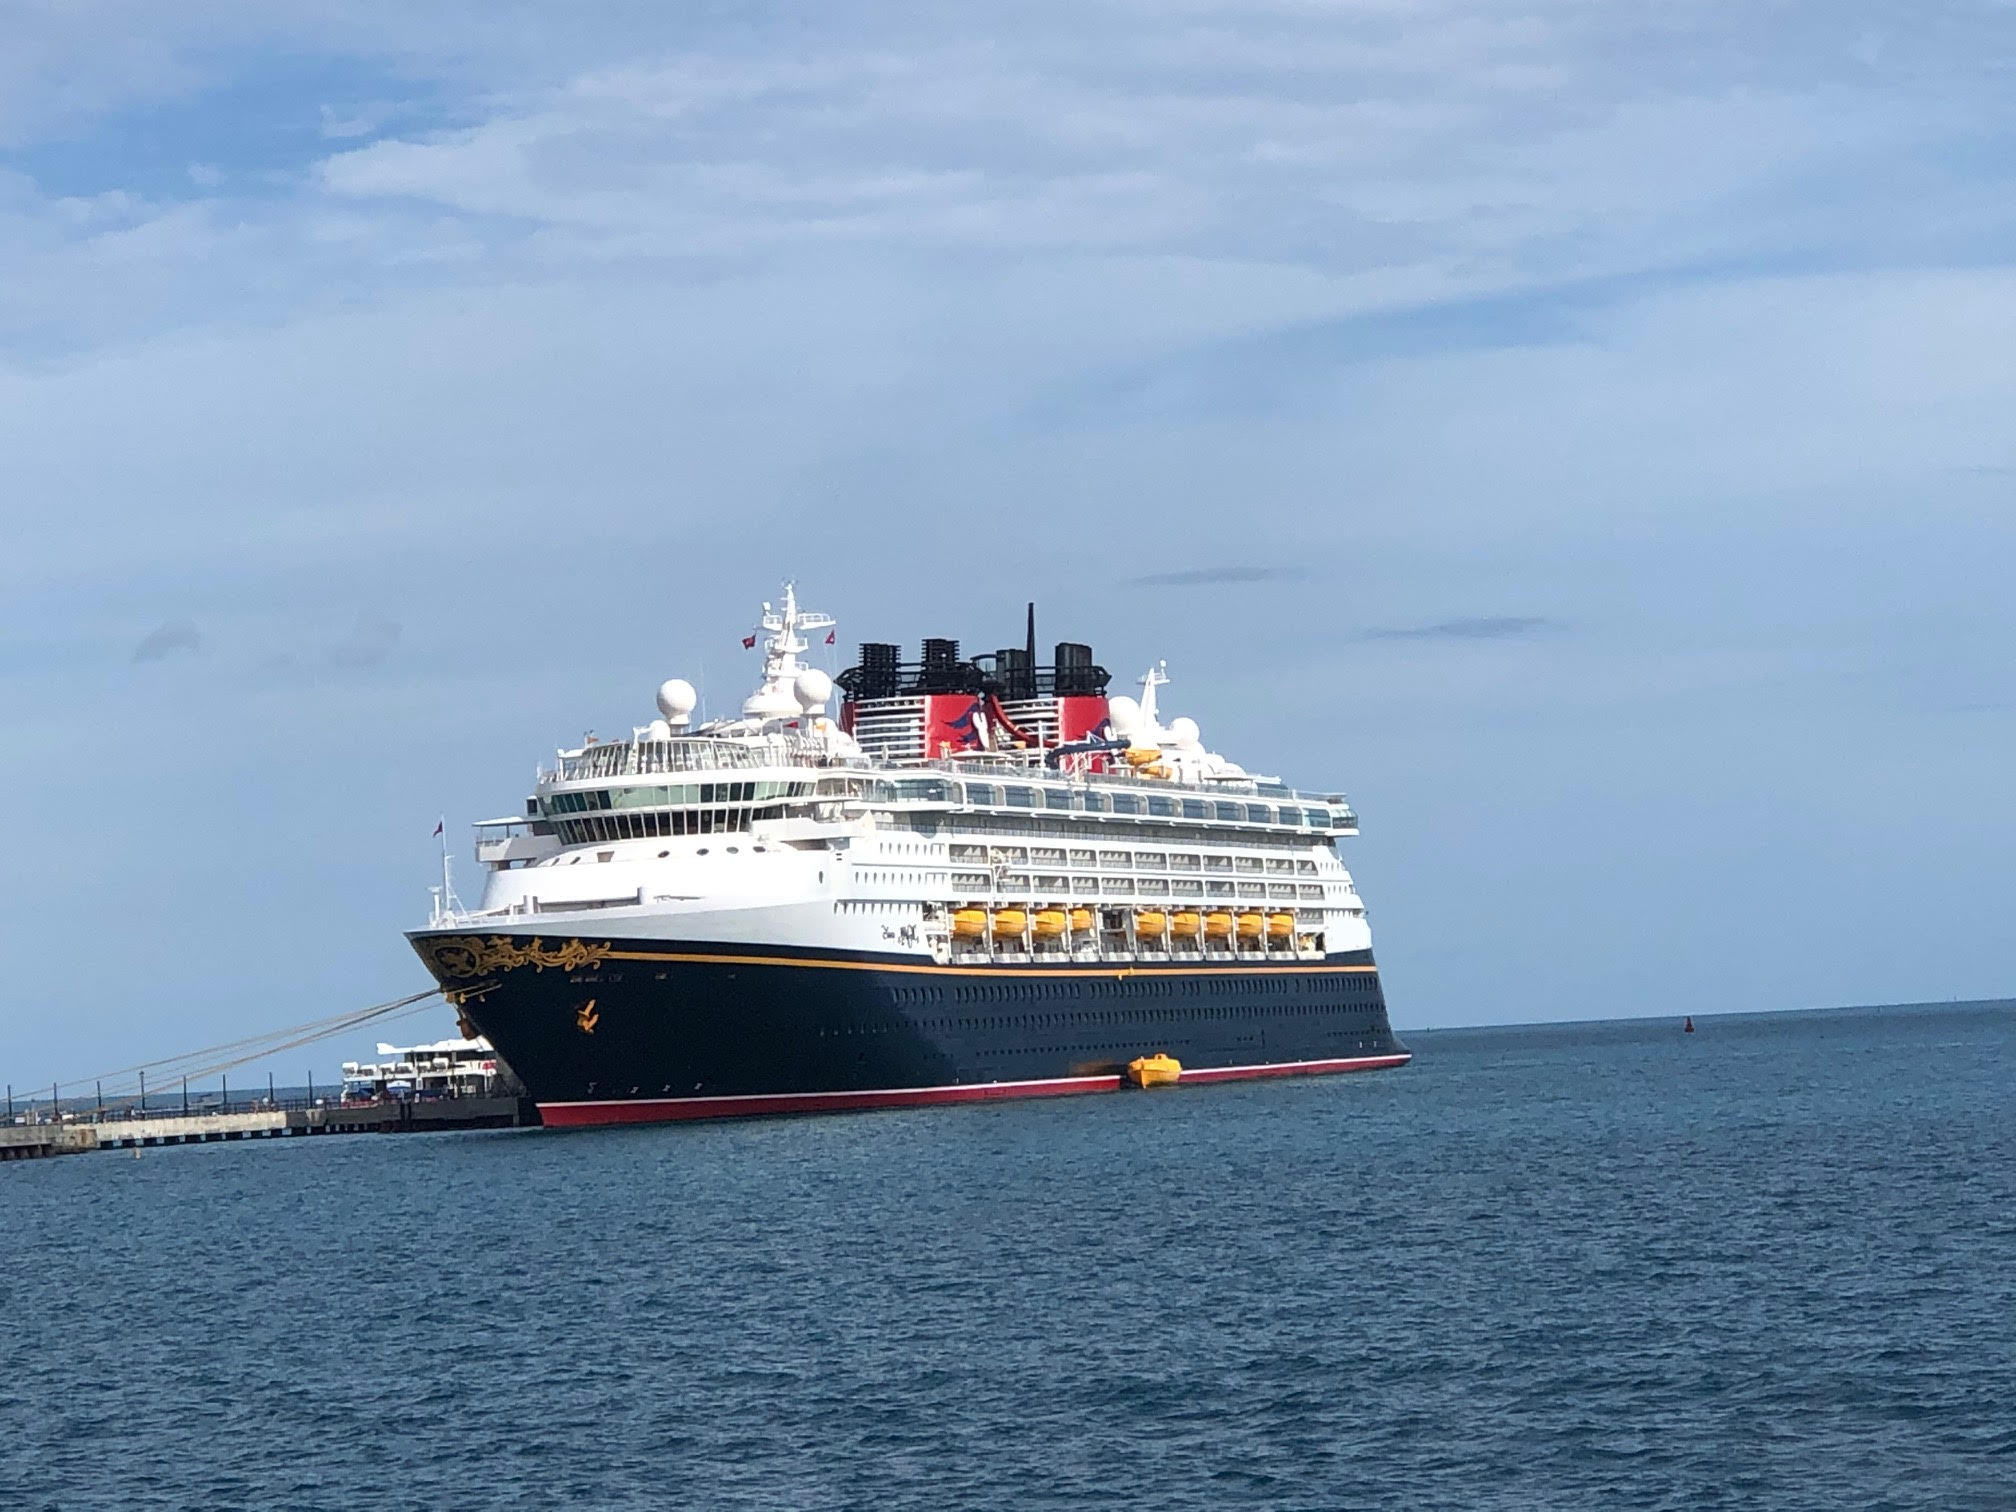 disney cruise ship for adults